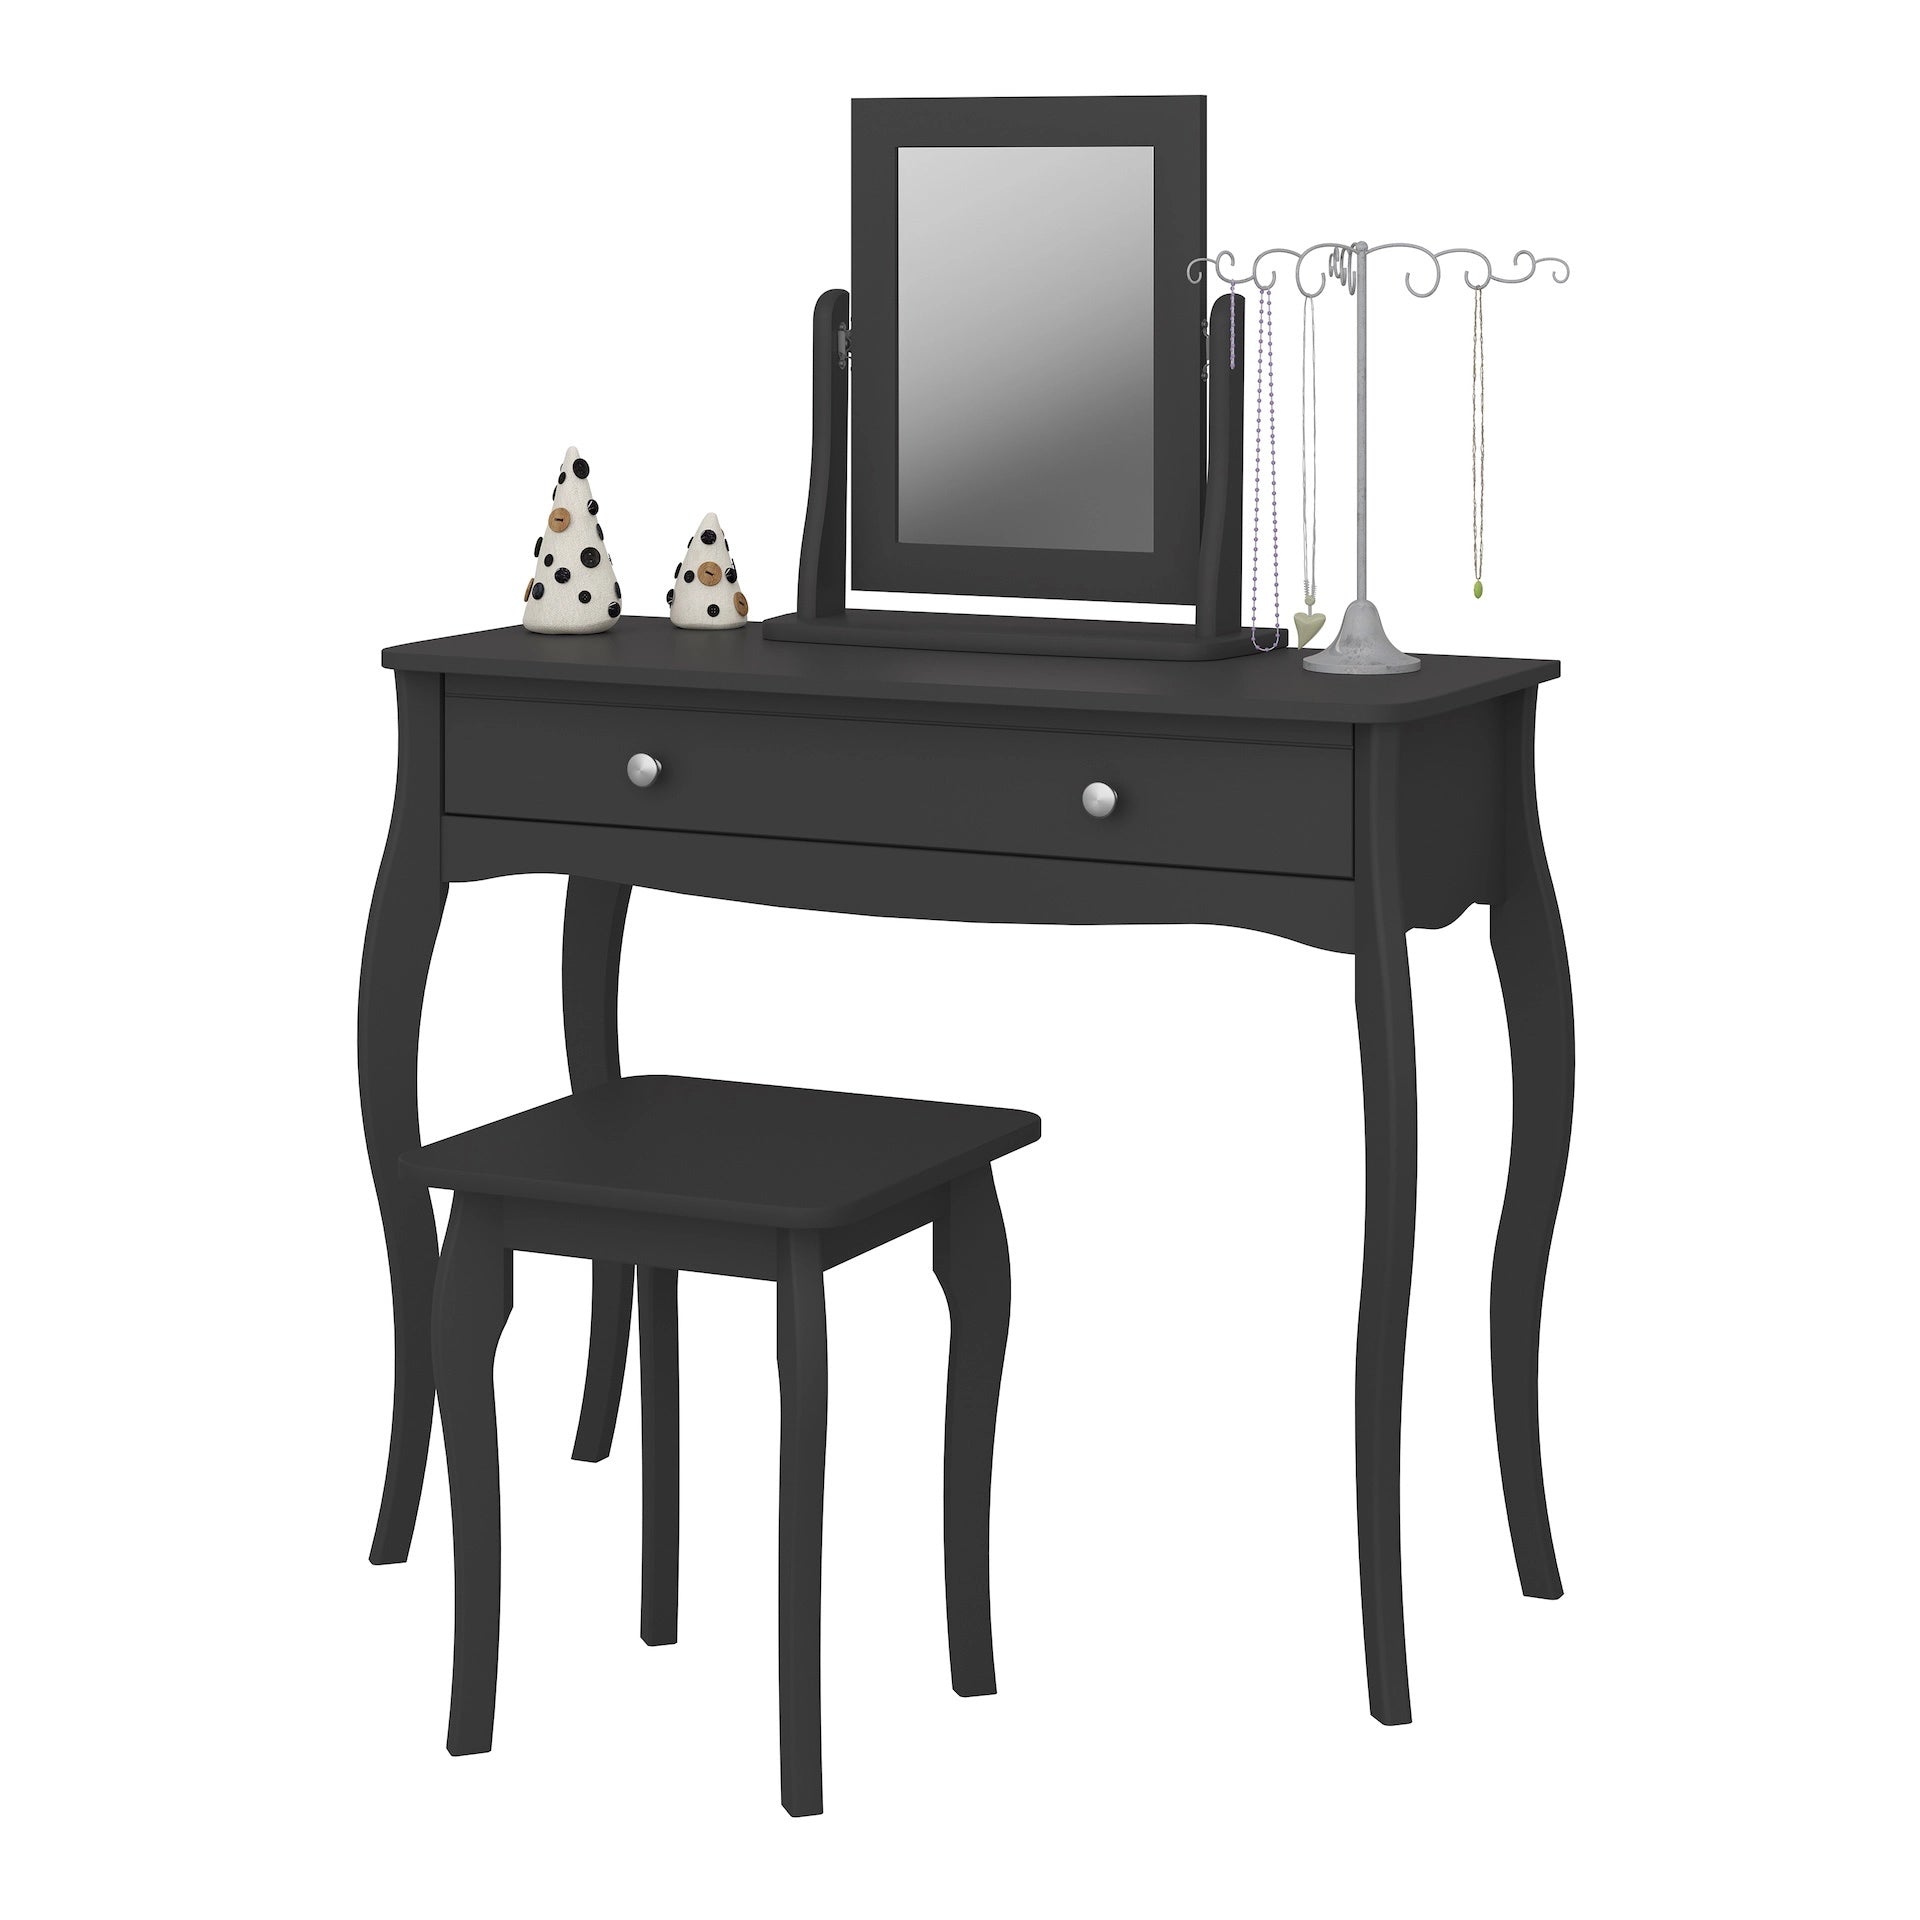 Furniture To Go Baroque 1 Drawer Vanity Included Stool & Mirror Black